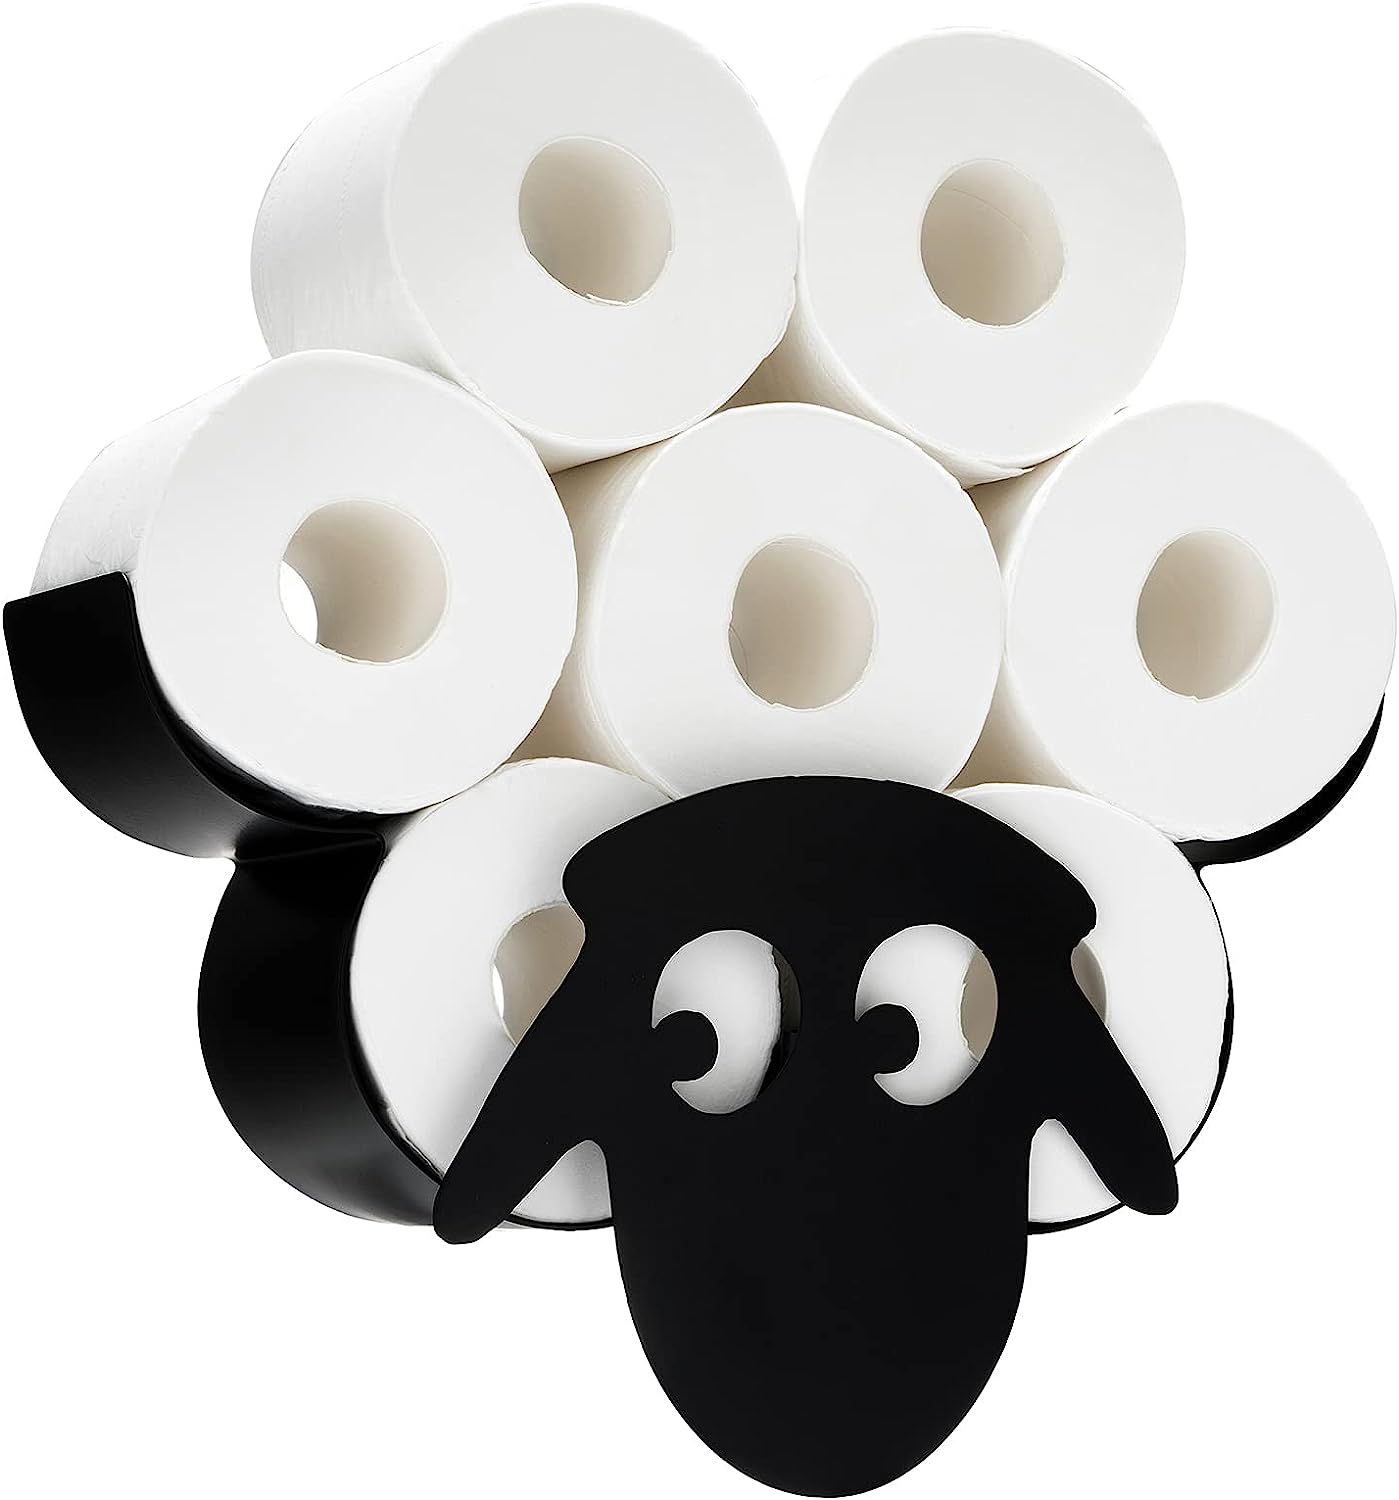 sheep wall mounted toilet roll holder